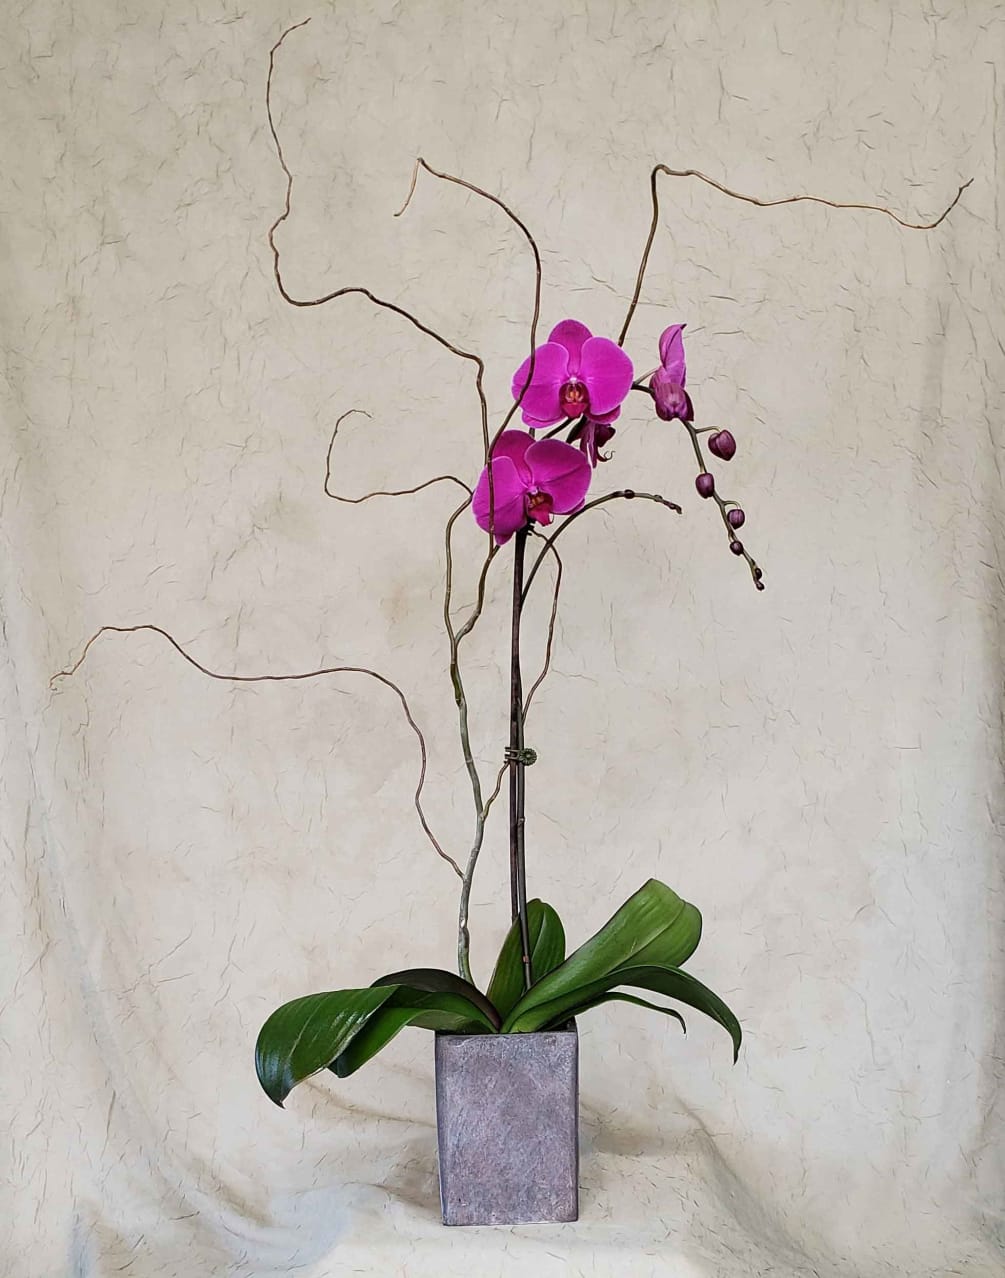 Orchid plant in a ceramic pot.